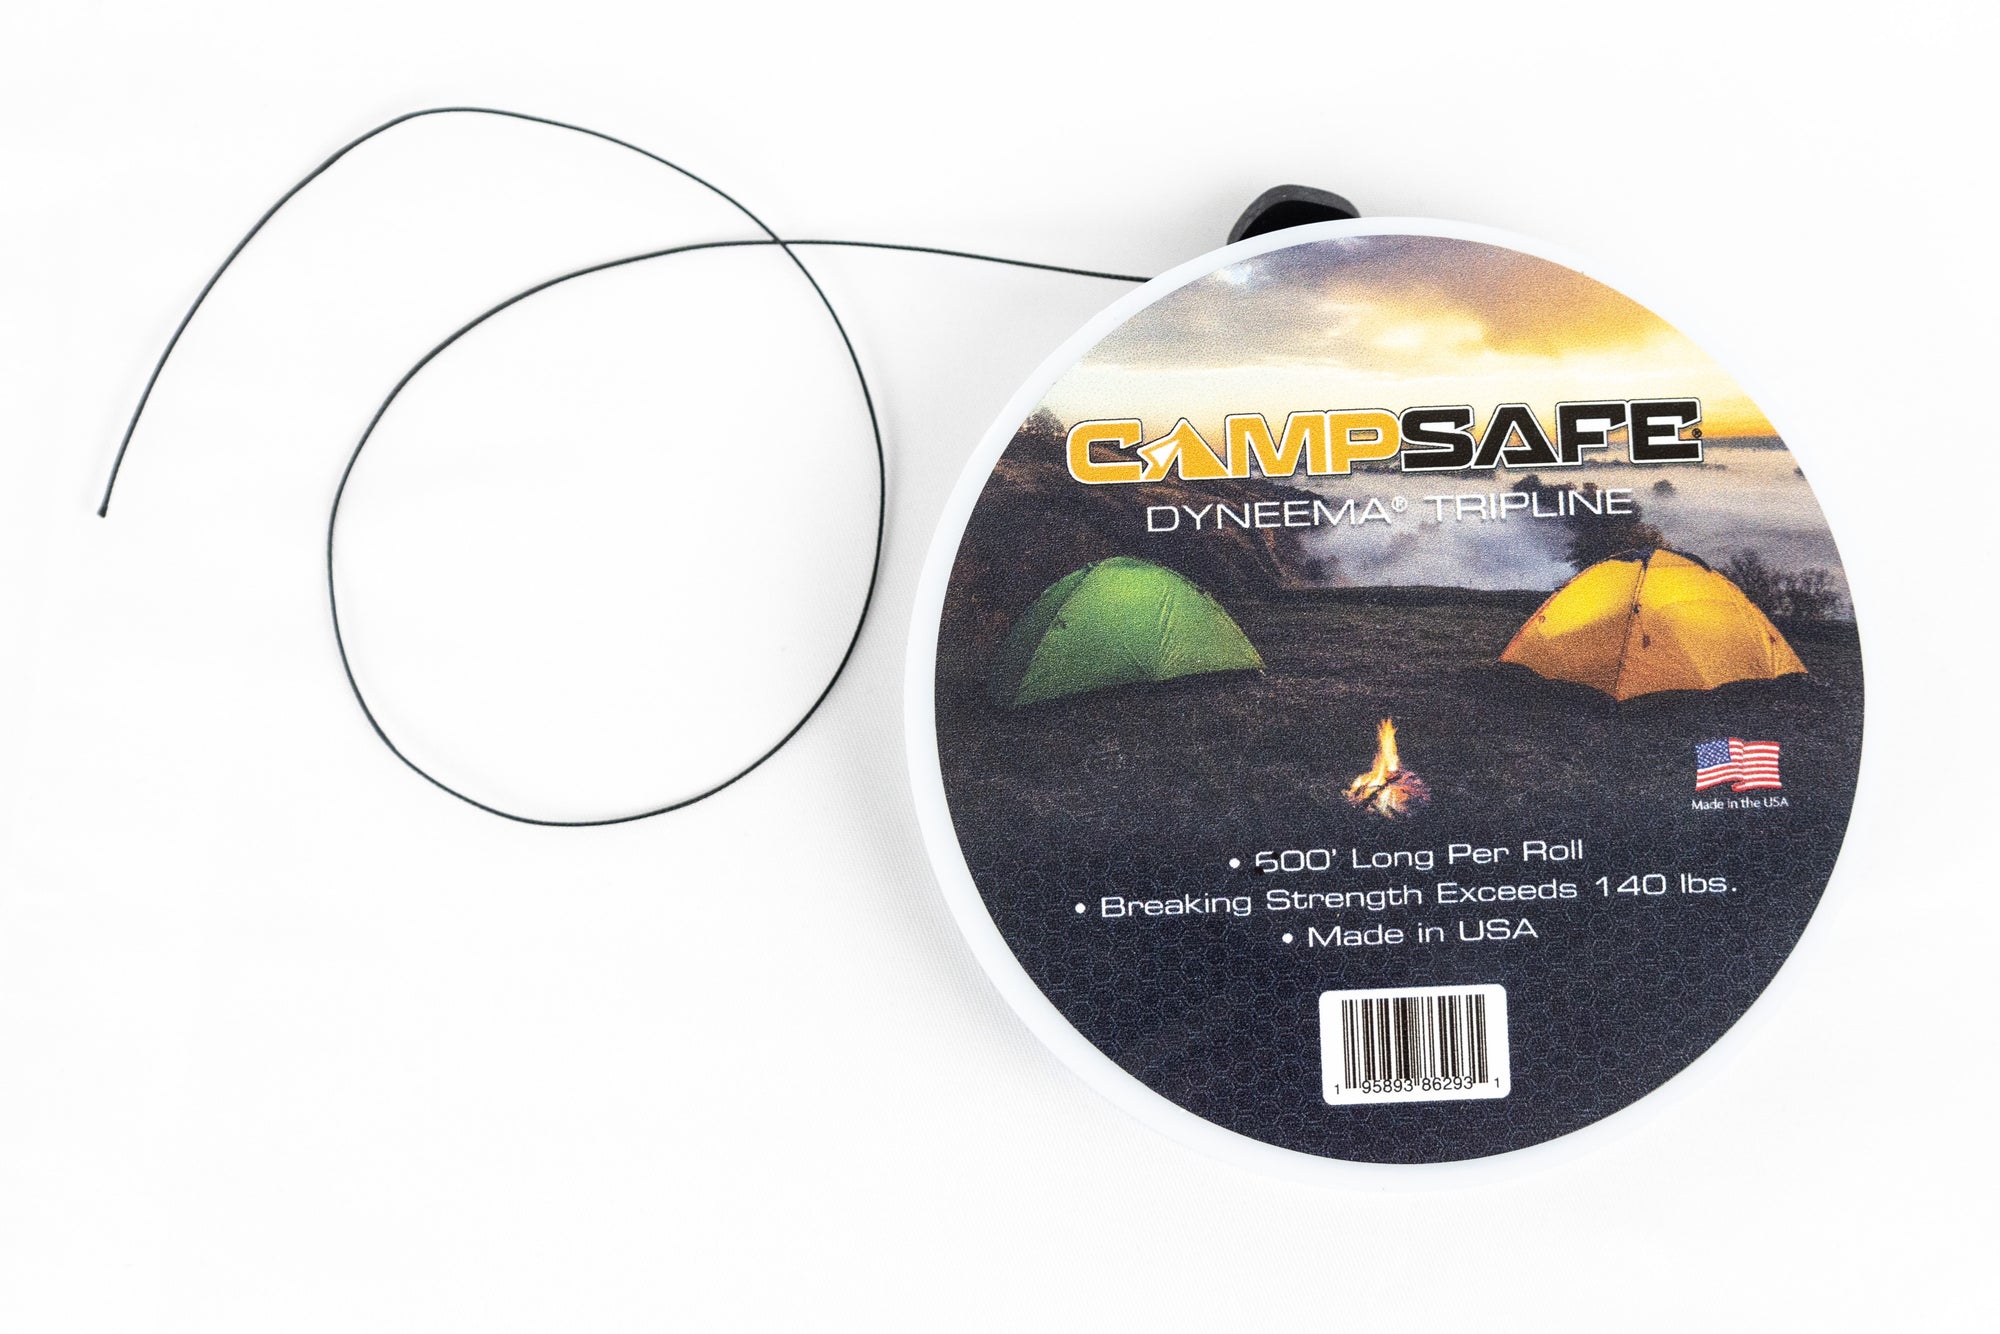 Round plastic spool holding 500' dyneema trip line with Camp Safe logo and two tents on package. Made in the USA | 500' long per roll | Breaking strength exceeds 140 lbs 